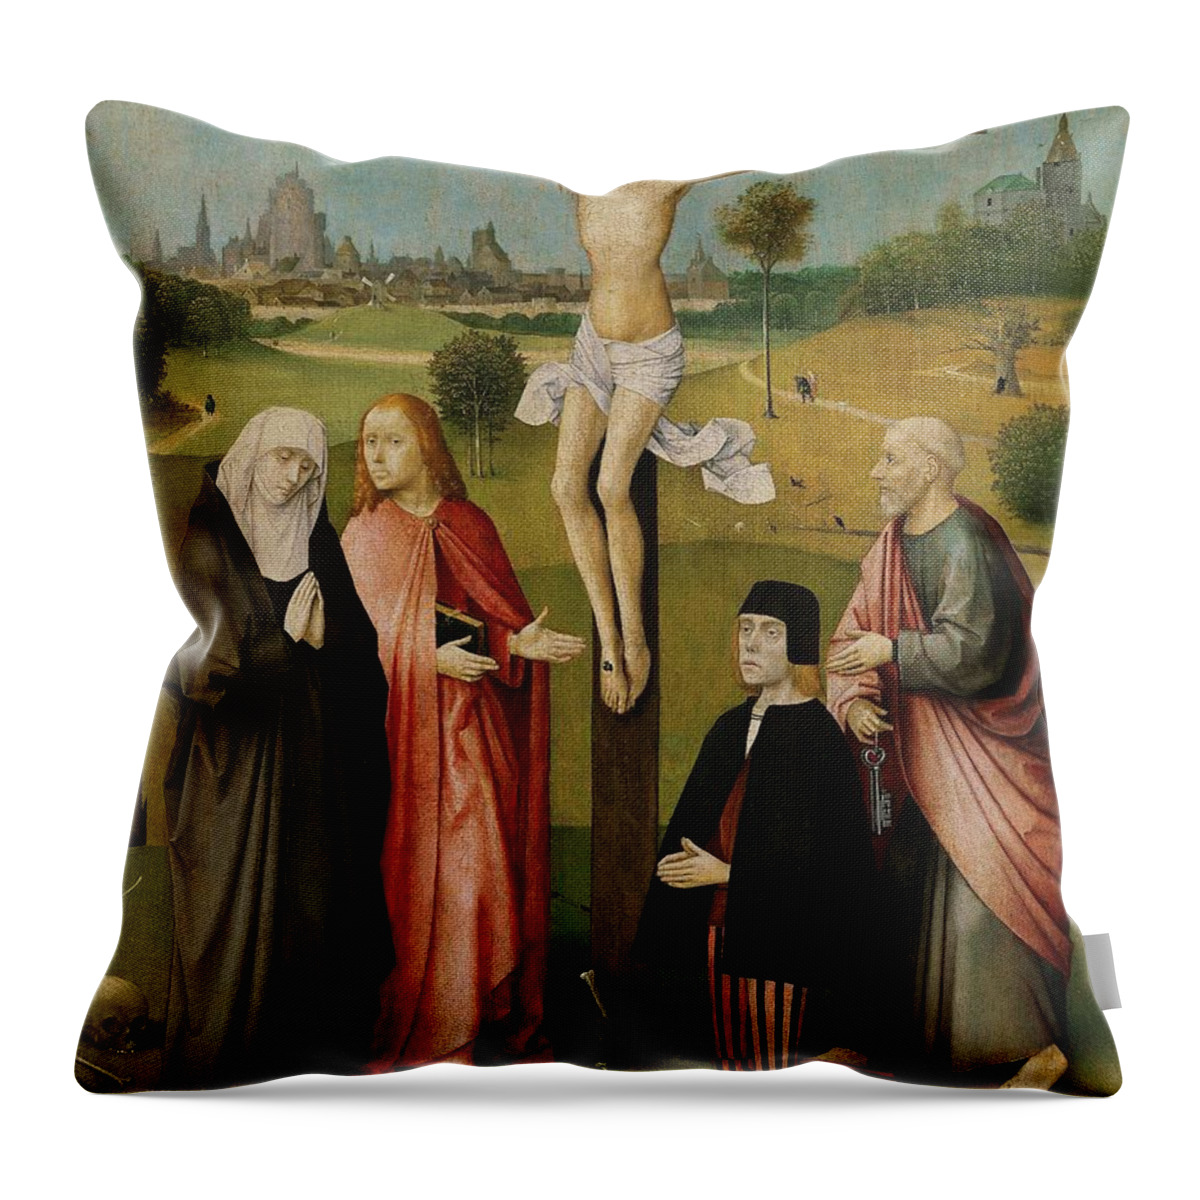 Crucifixion With A Donor Throw Pillow featuring the painting Hieronymus Bosch / 'Crucifixion with a Donor', 1480-1485, Oil on wood, 74.7 x 61 cm. JESUS. by Hieronymus Bosch -c 1450-1516-